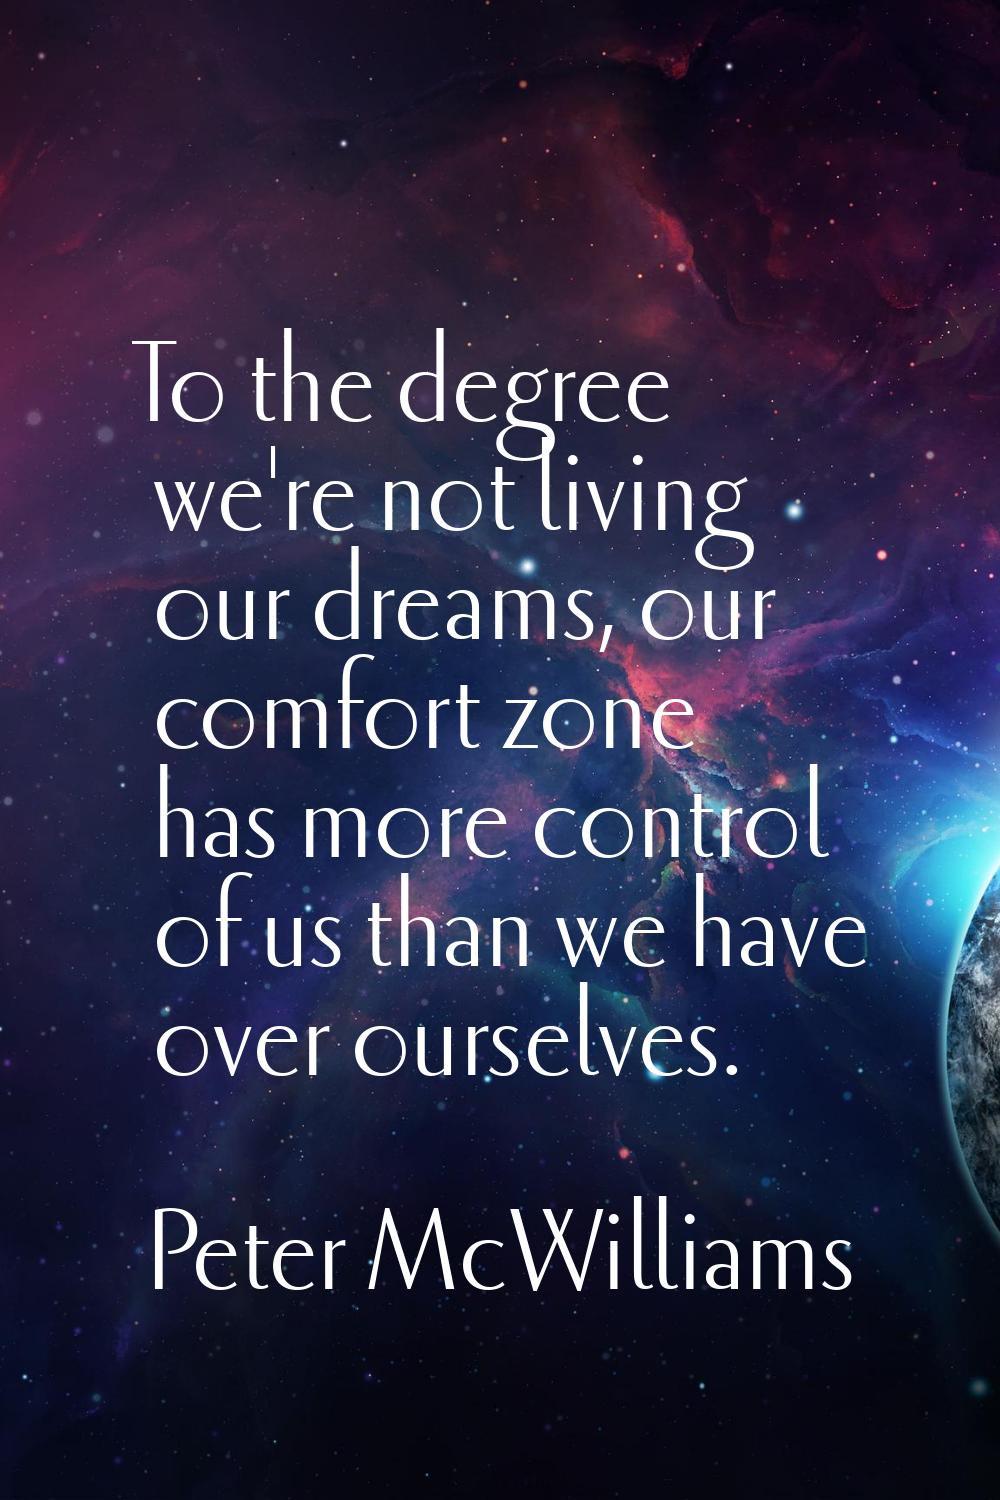 To the degree we're not living our dreams, our comfort zone has more control of us than we have ove